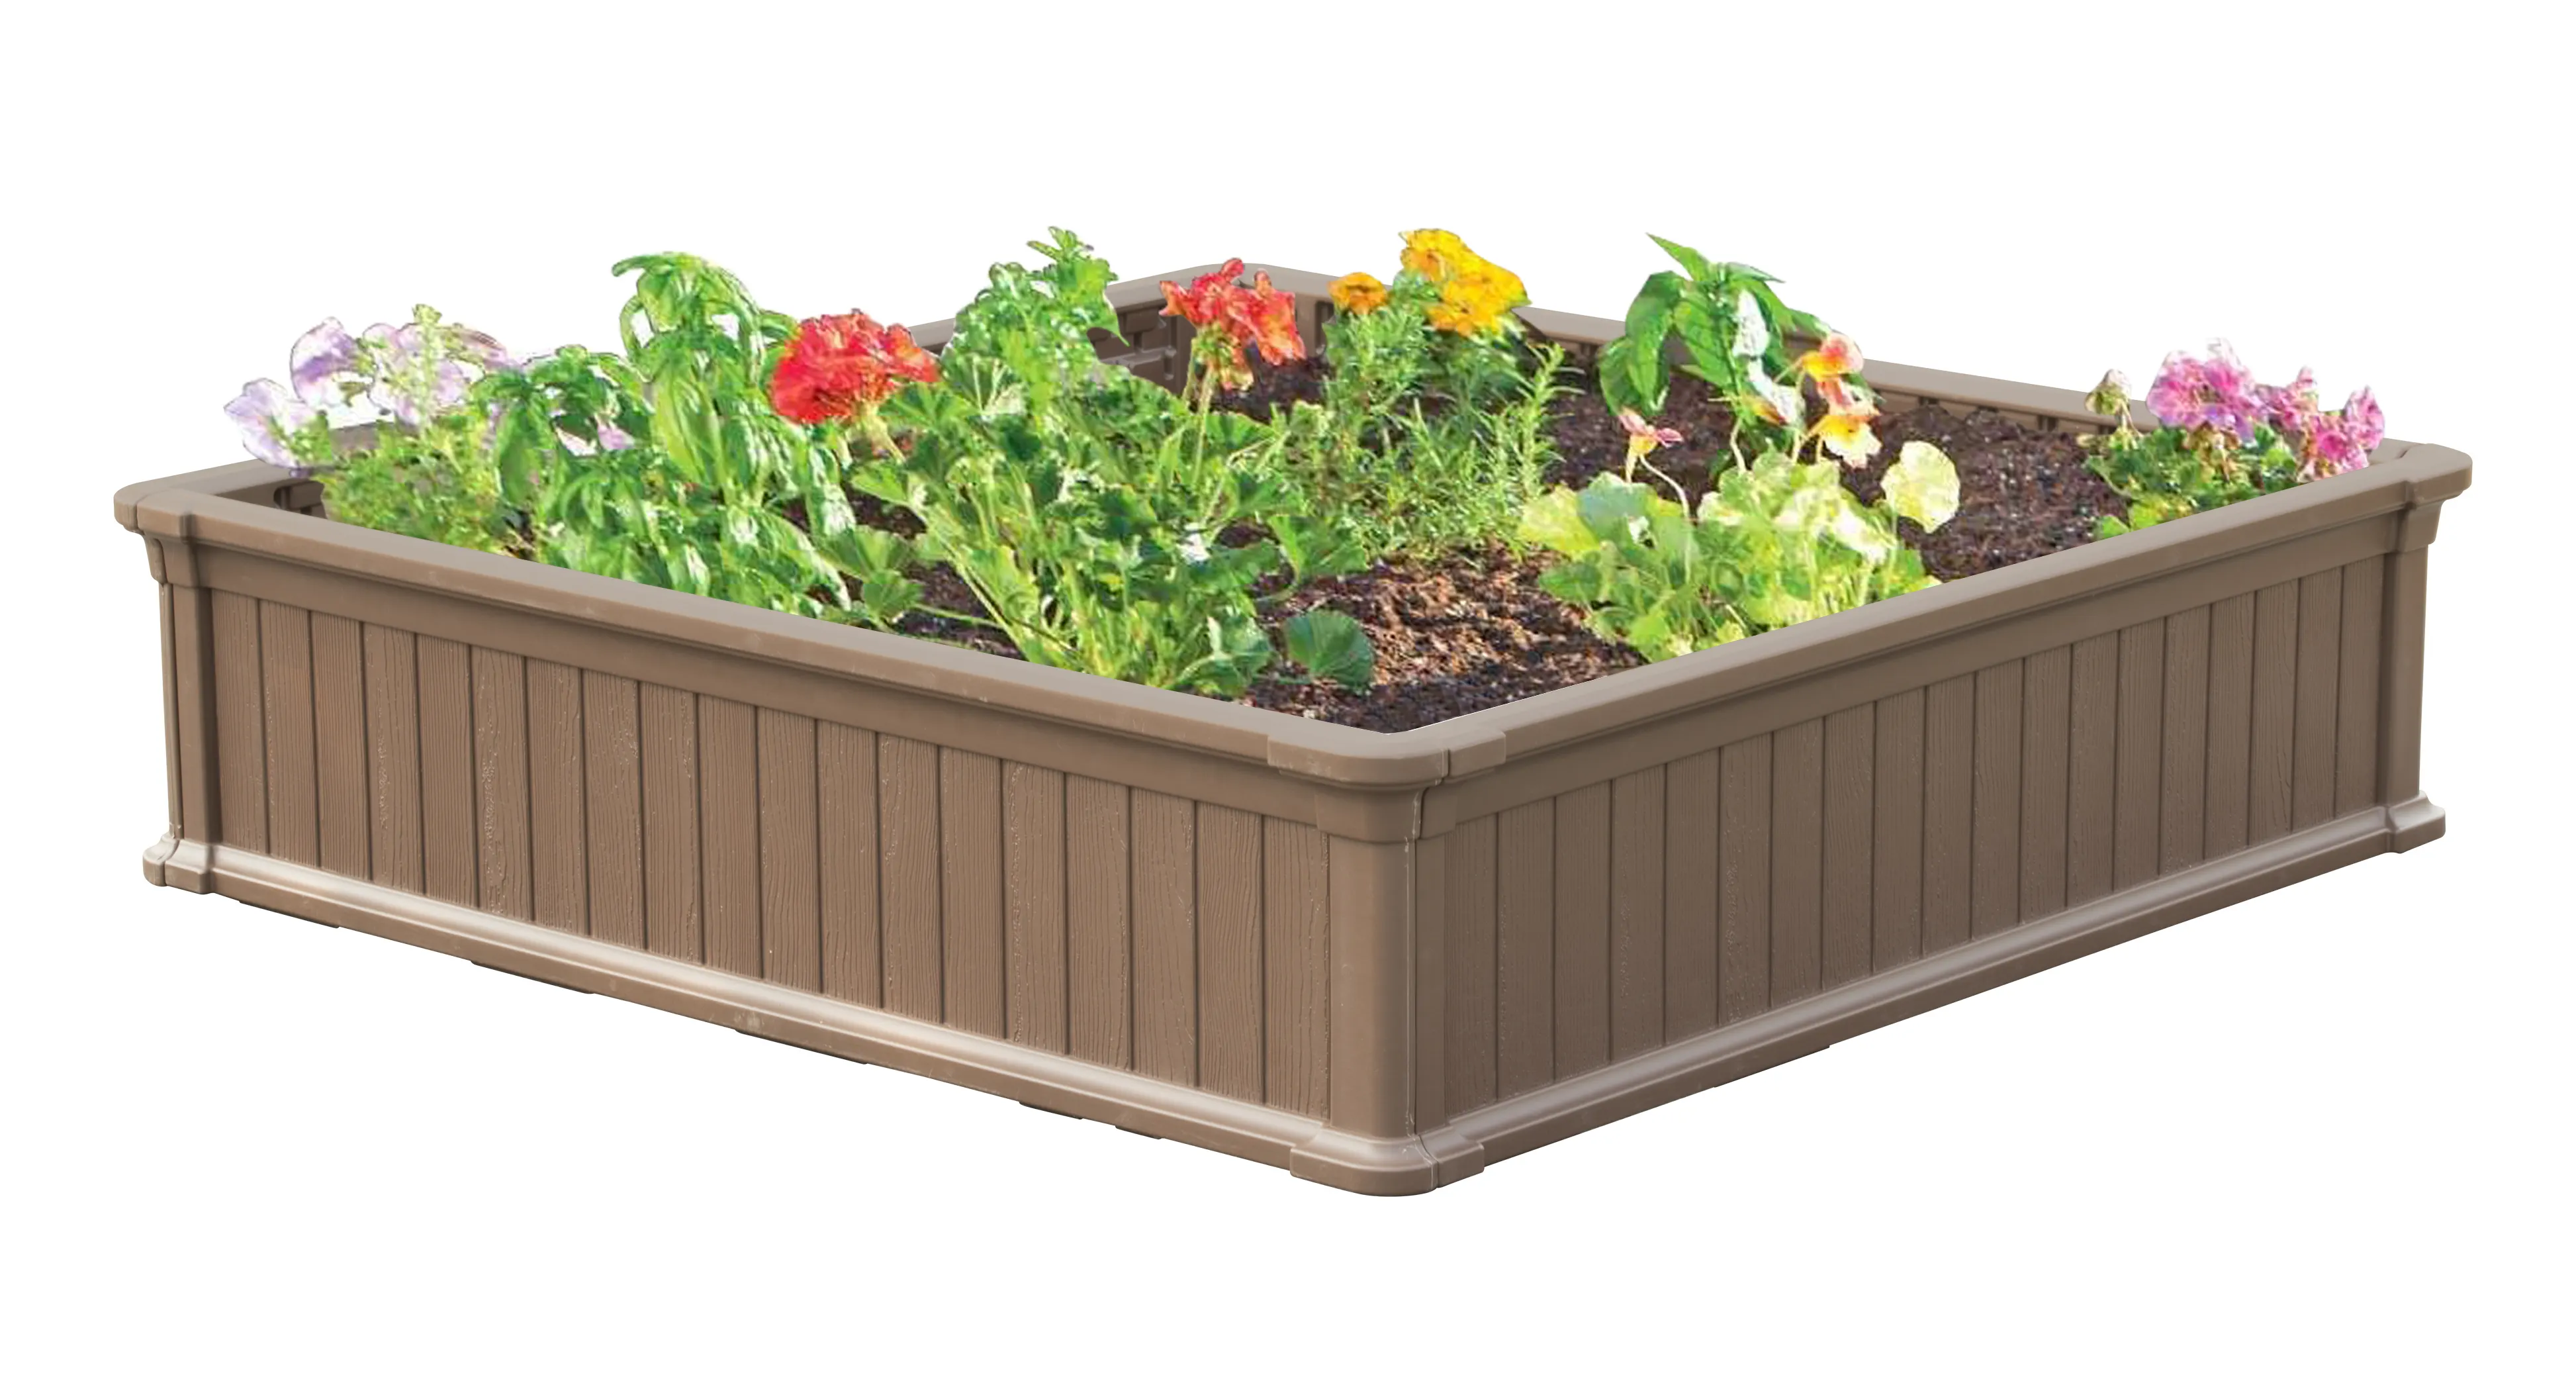 Hot Selling Plastic Garden Planter Box For Outdoor